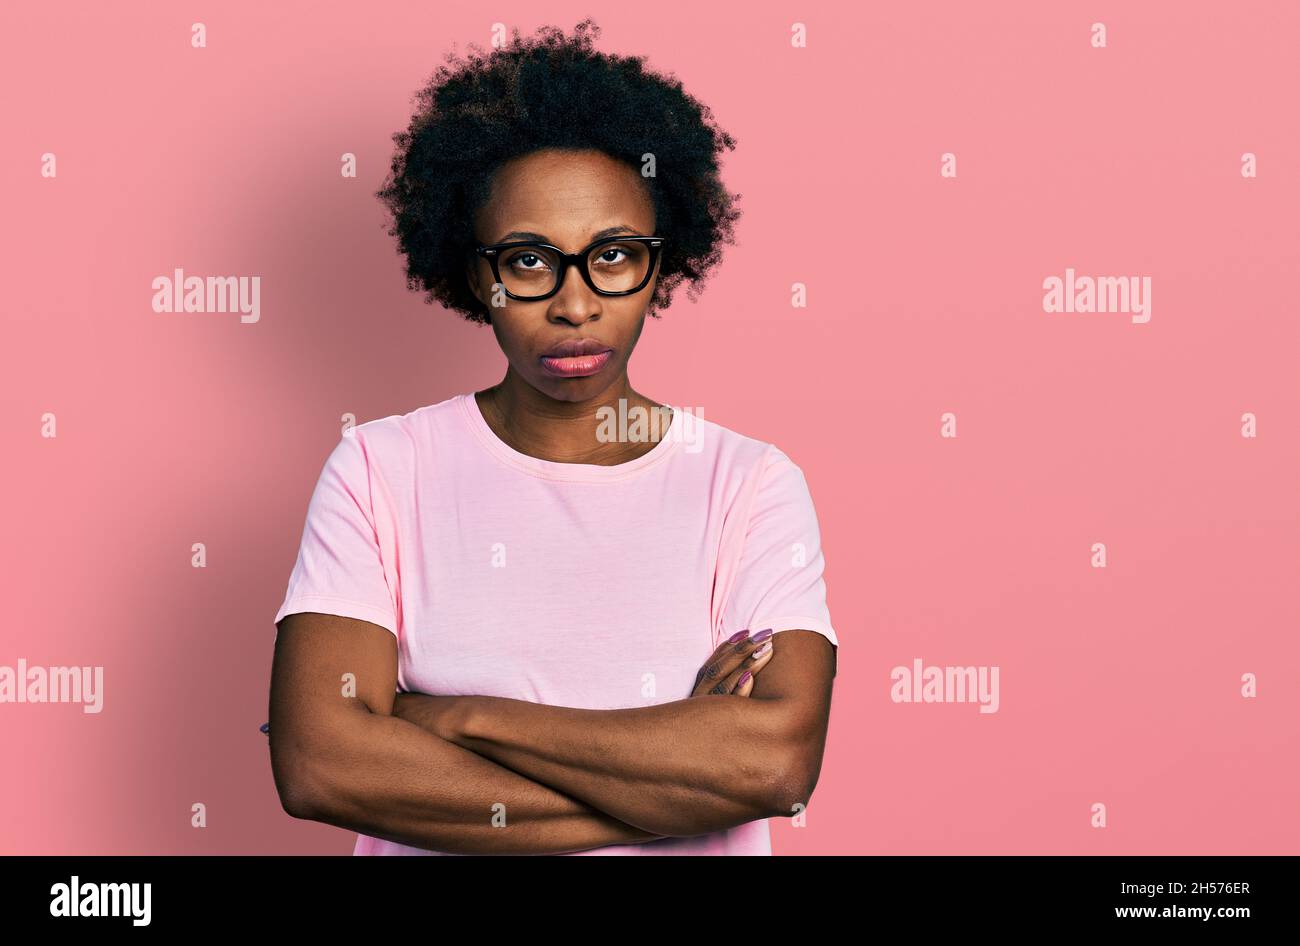 African american woman with afro hair wearing casual clothes and glasses skeptic and nervous, disapproving expression on face with crossed arms. negat Stock Photo